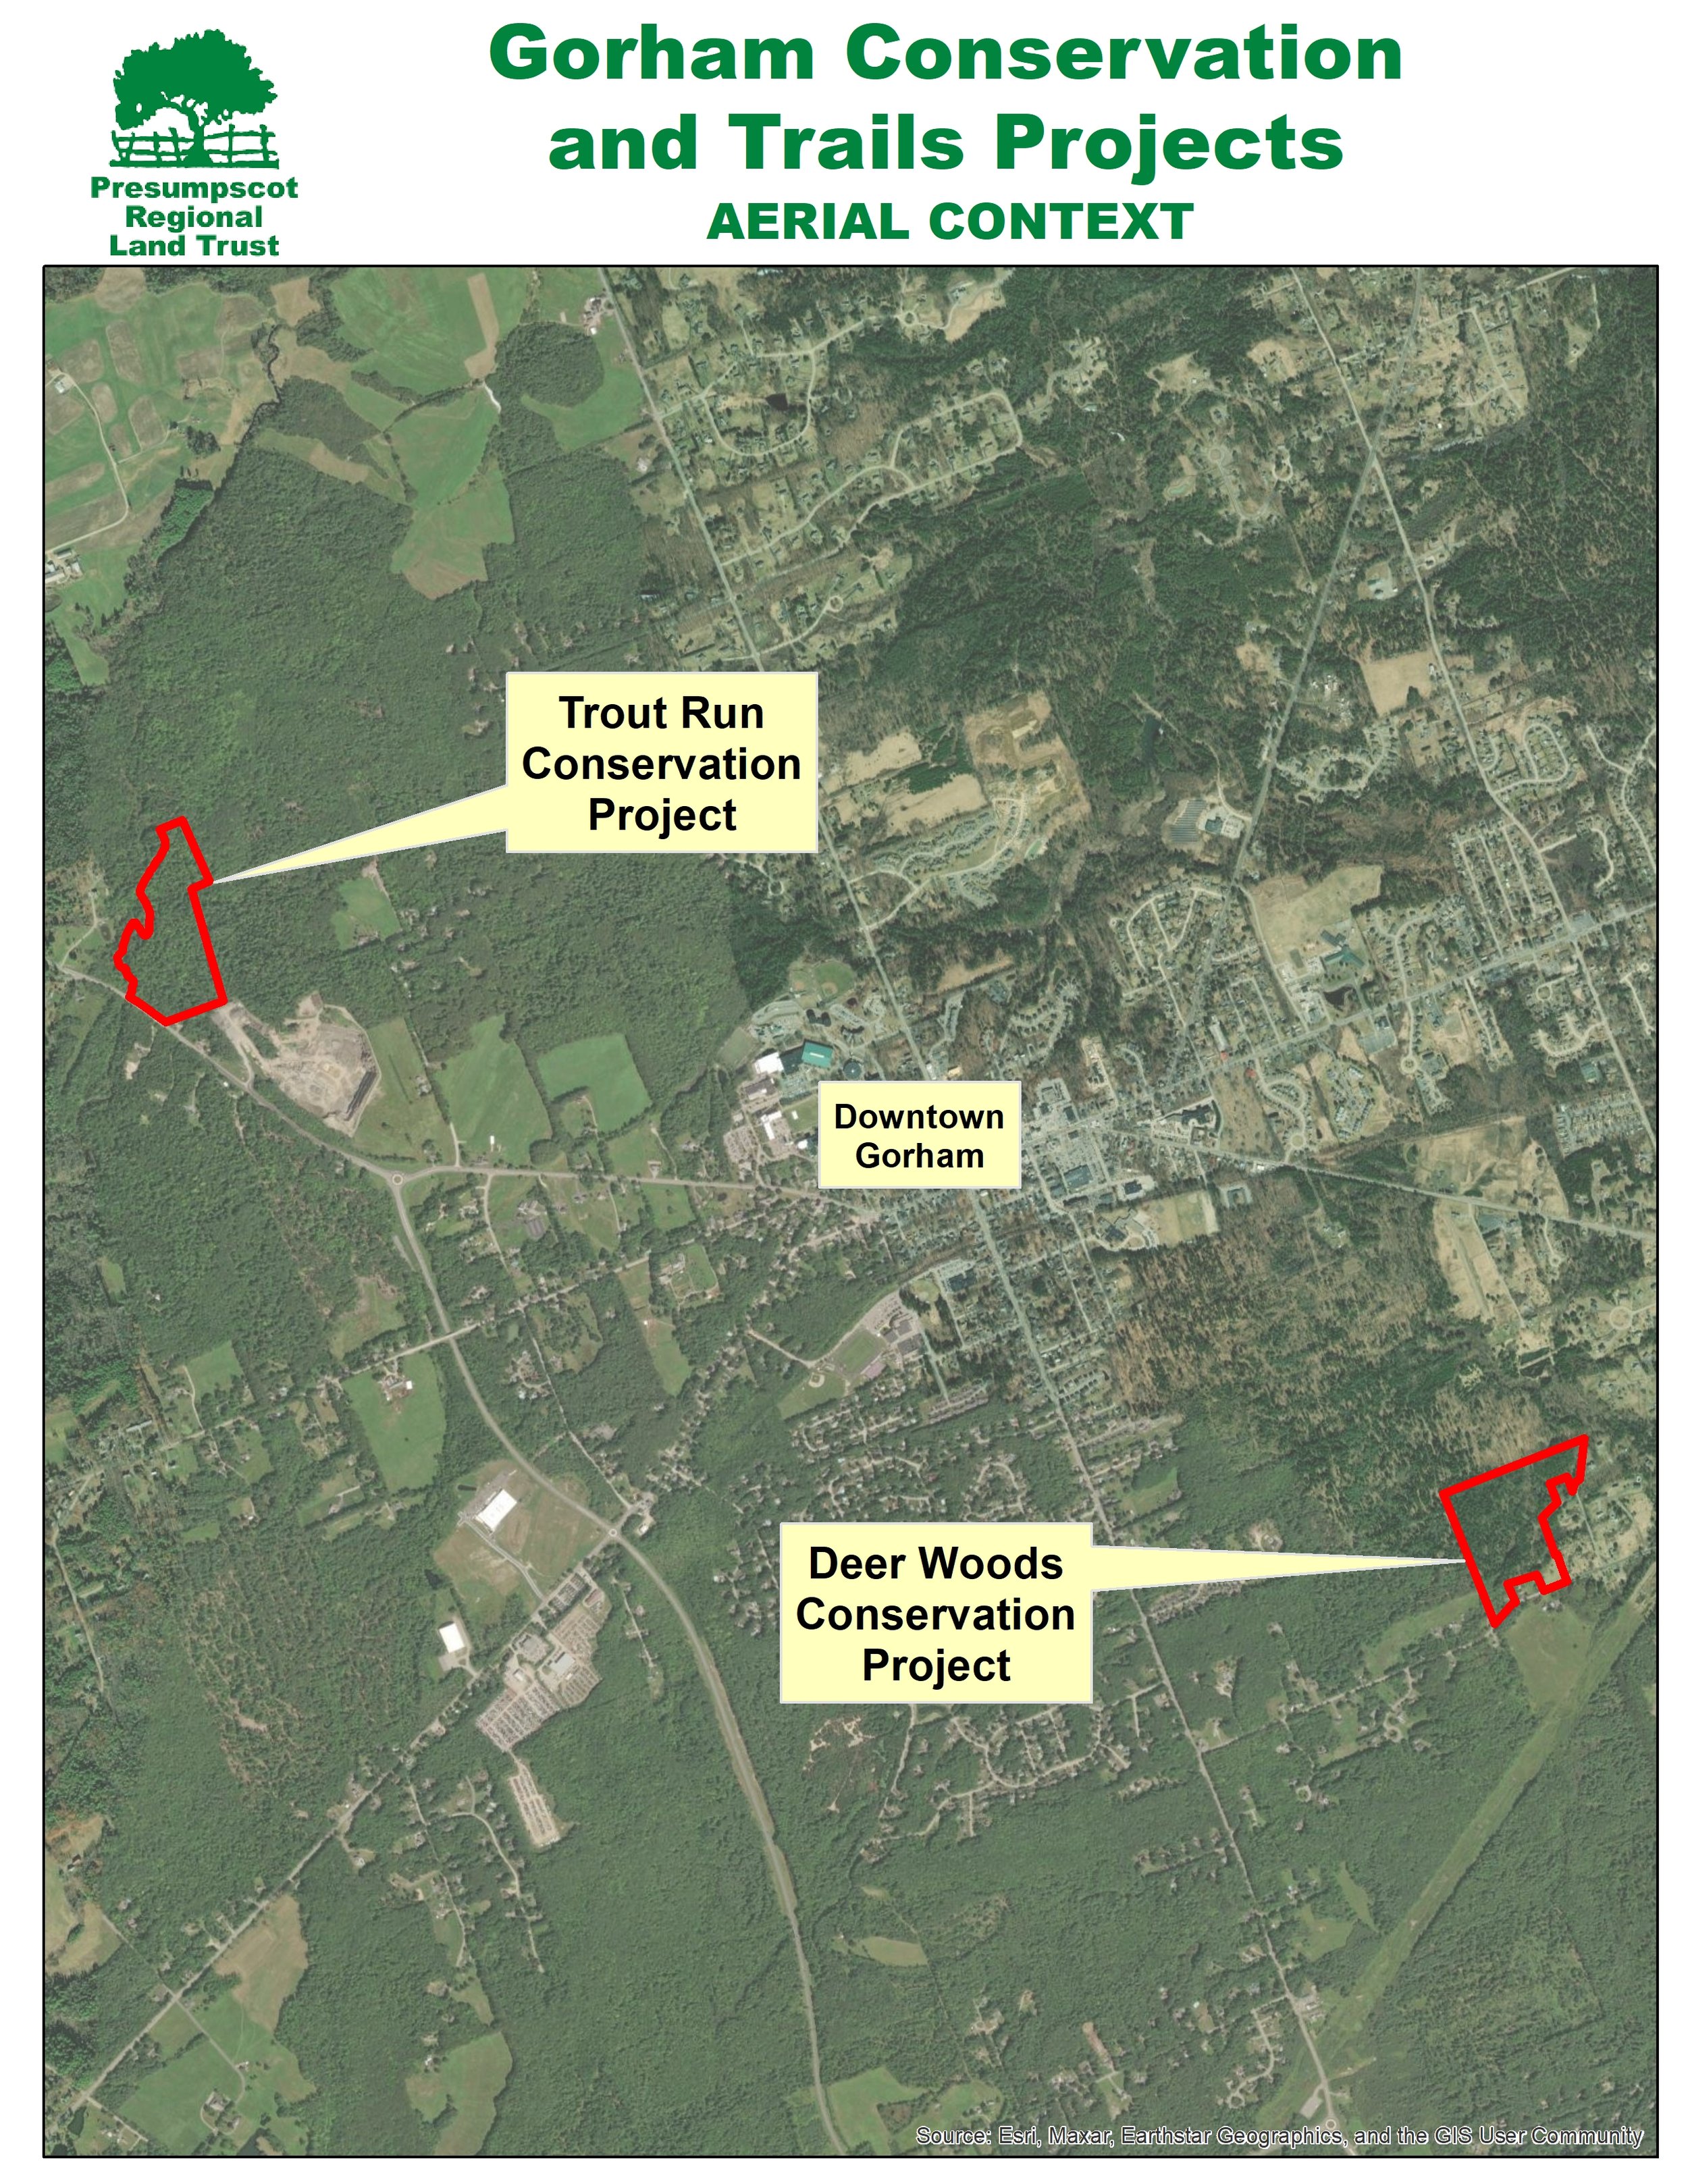 Gorham Conservation Projects Aerial Map (3).jpg